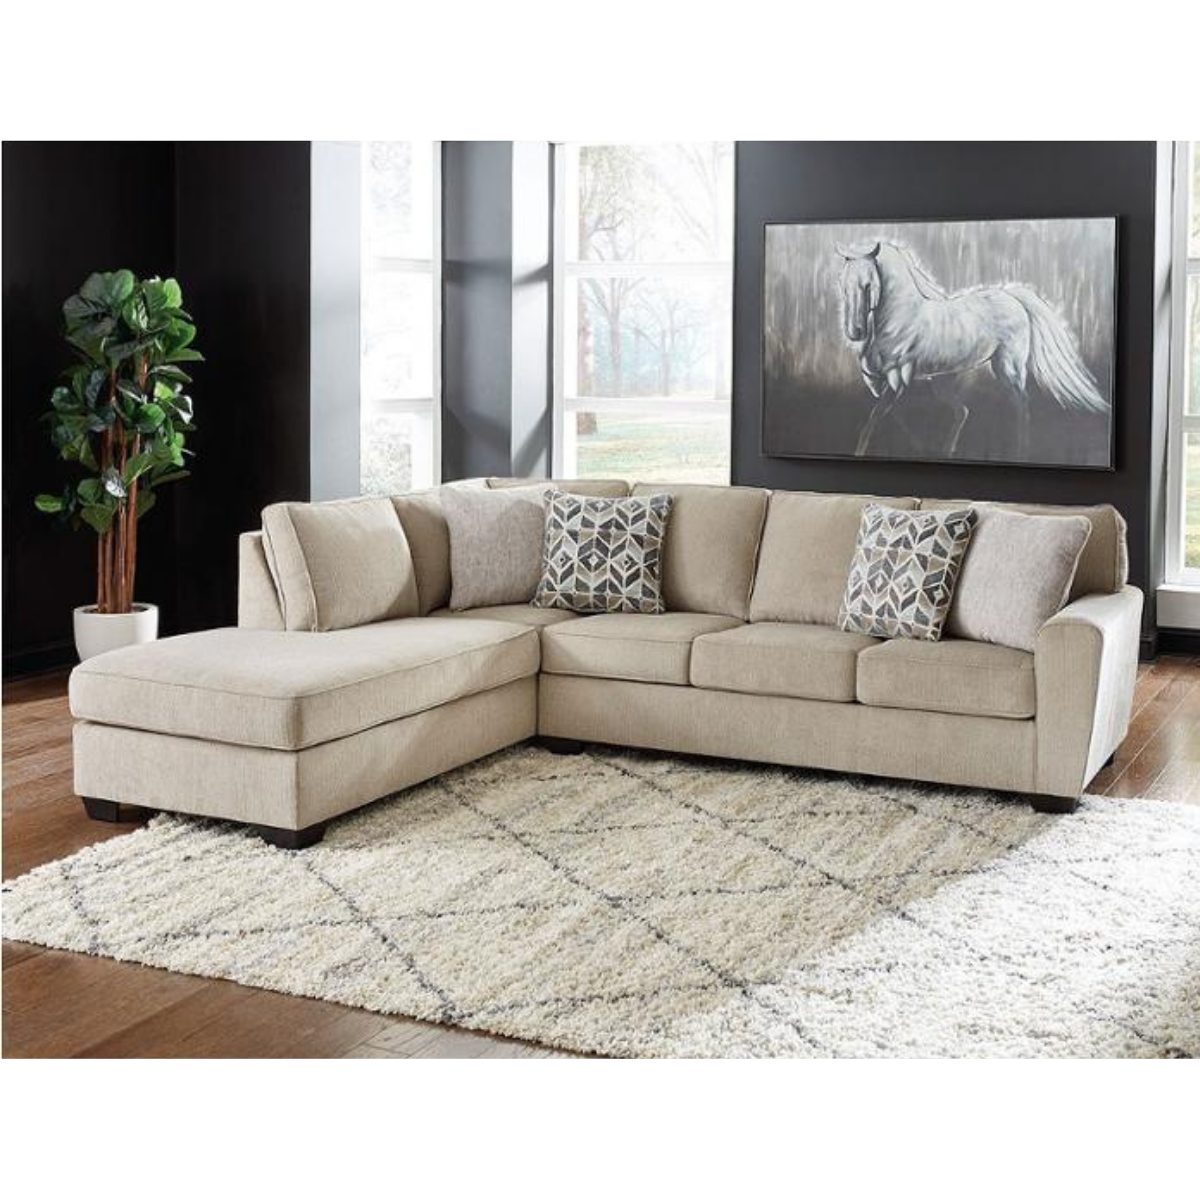 Ashley Decelle 2 Piece Sectional with Chaise 8030516/67 $1193.00 90 Days Same as Cash*